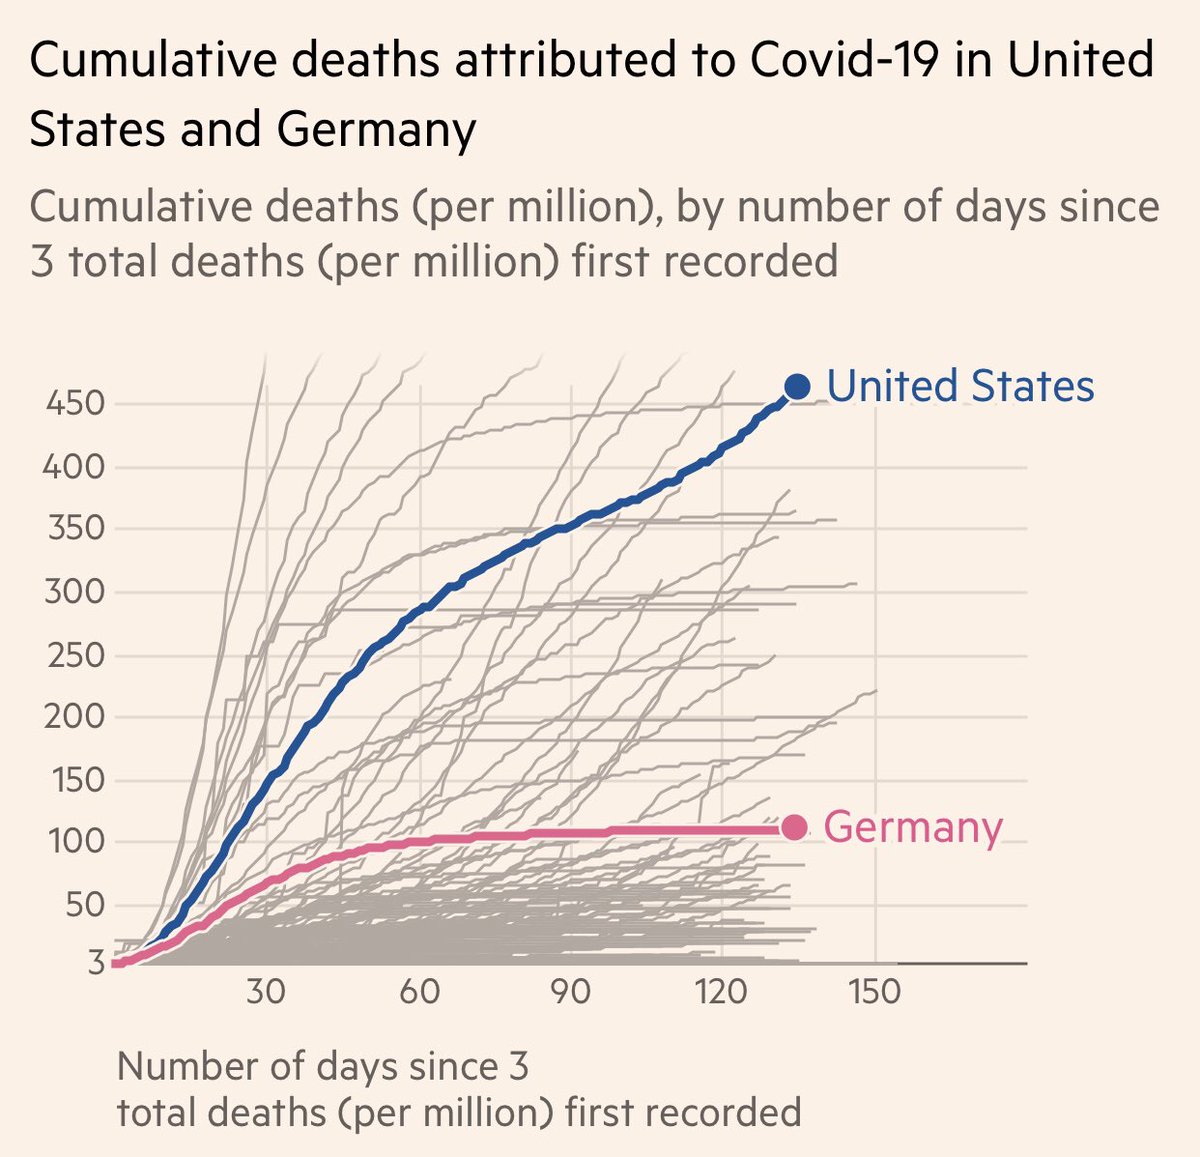 Germany is a good country to benchmark to. It has done a good job on COVID, and a country in Europe which we has good financial resources like us. Germany was surrounded by cases in Europe. But contained COVID. Germany’s 110 per million deaths is where we could have been.2/